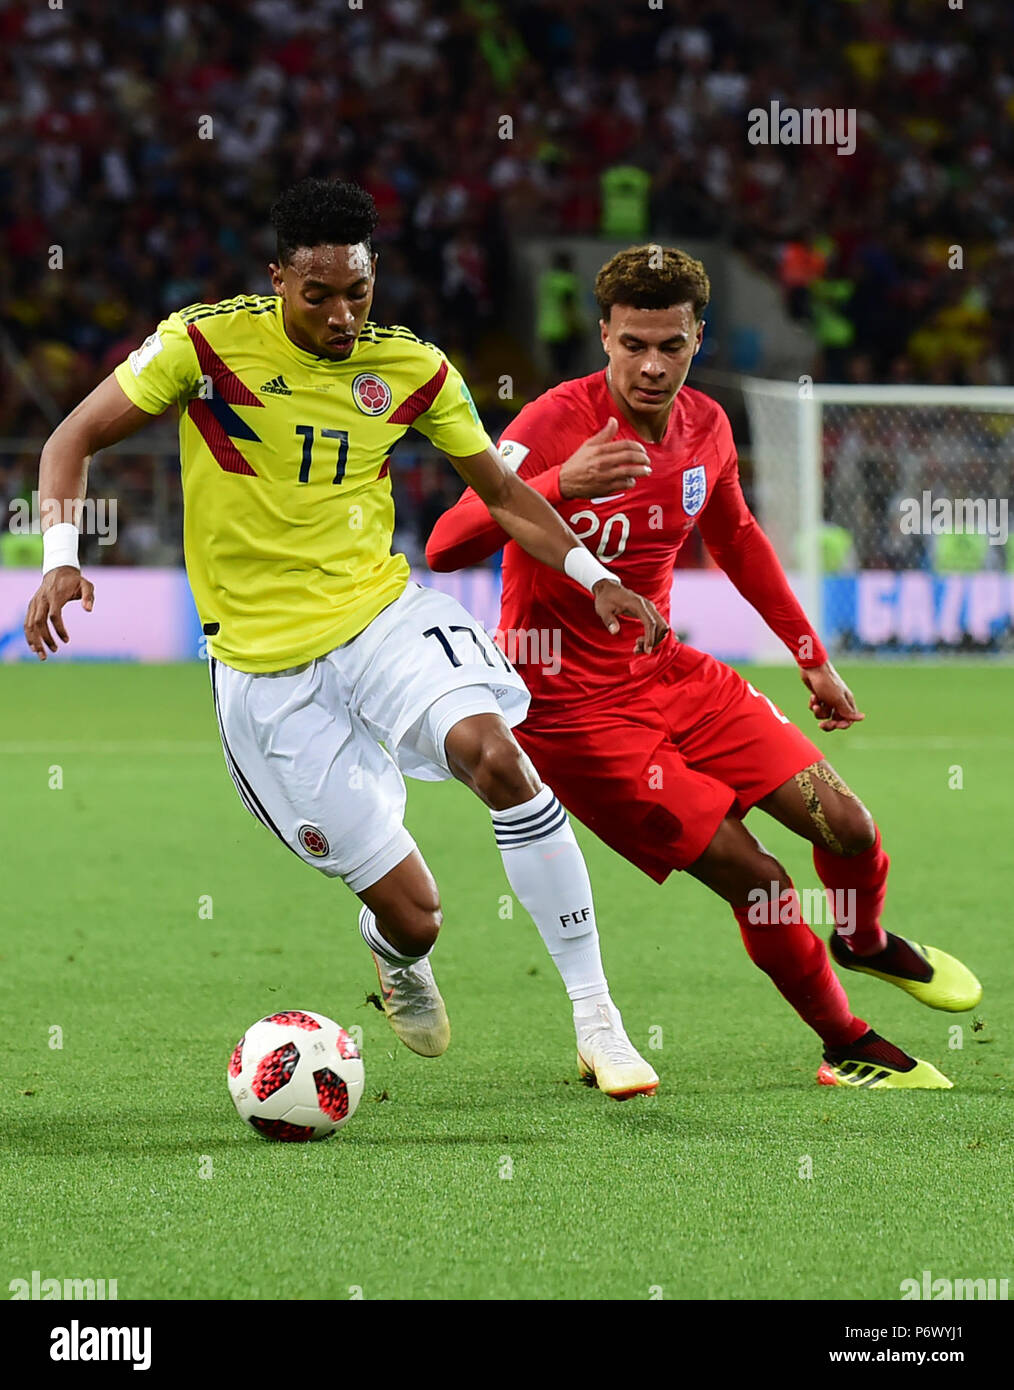 Moscow, Russia. 3rd July, 2018. Dele Alli (R) of England vies with Johan Mojica of Colombia during the 2018 FIFA World Cup round of 16 match between England and Colombia in Moscow, Russia, July 3, 2018. Credit: Du Yu/Xinhua/Alamy Live News Stock Photo